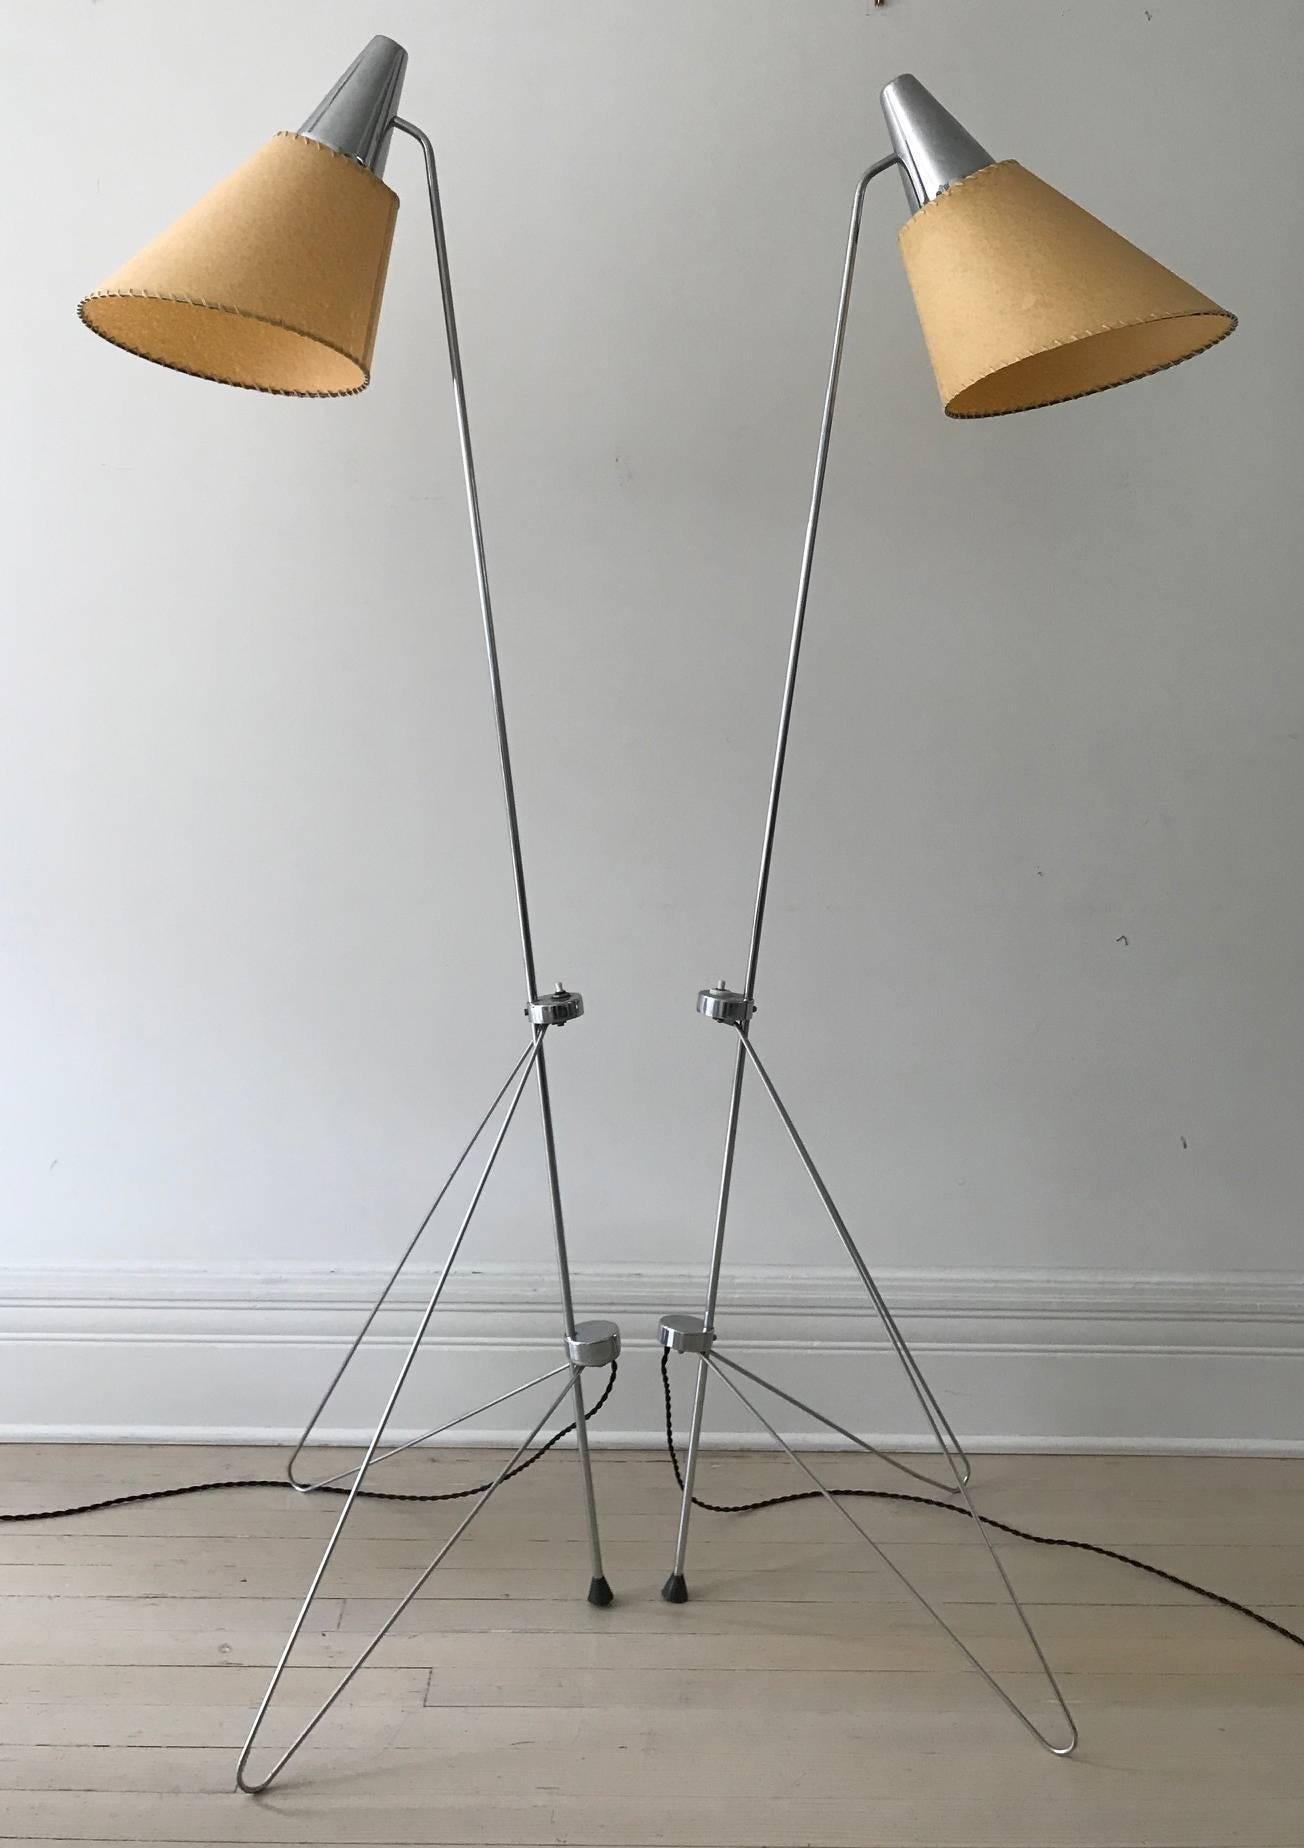 Modernists lamps designed by Josef Hurka. The structure angles forward on two front hairpin legs. There is a switch at the top of those legs. The lamp has a newly made, hand-stitched parchment shade, based on original design and dimensions.